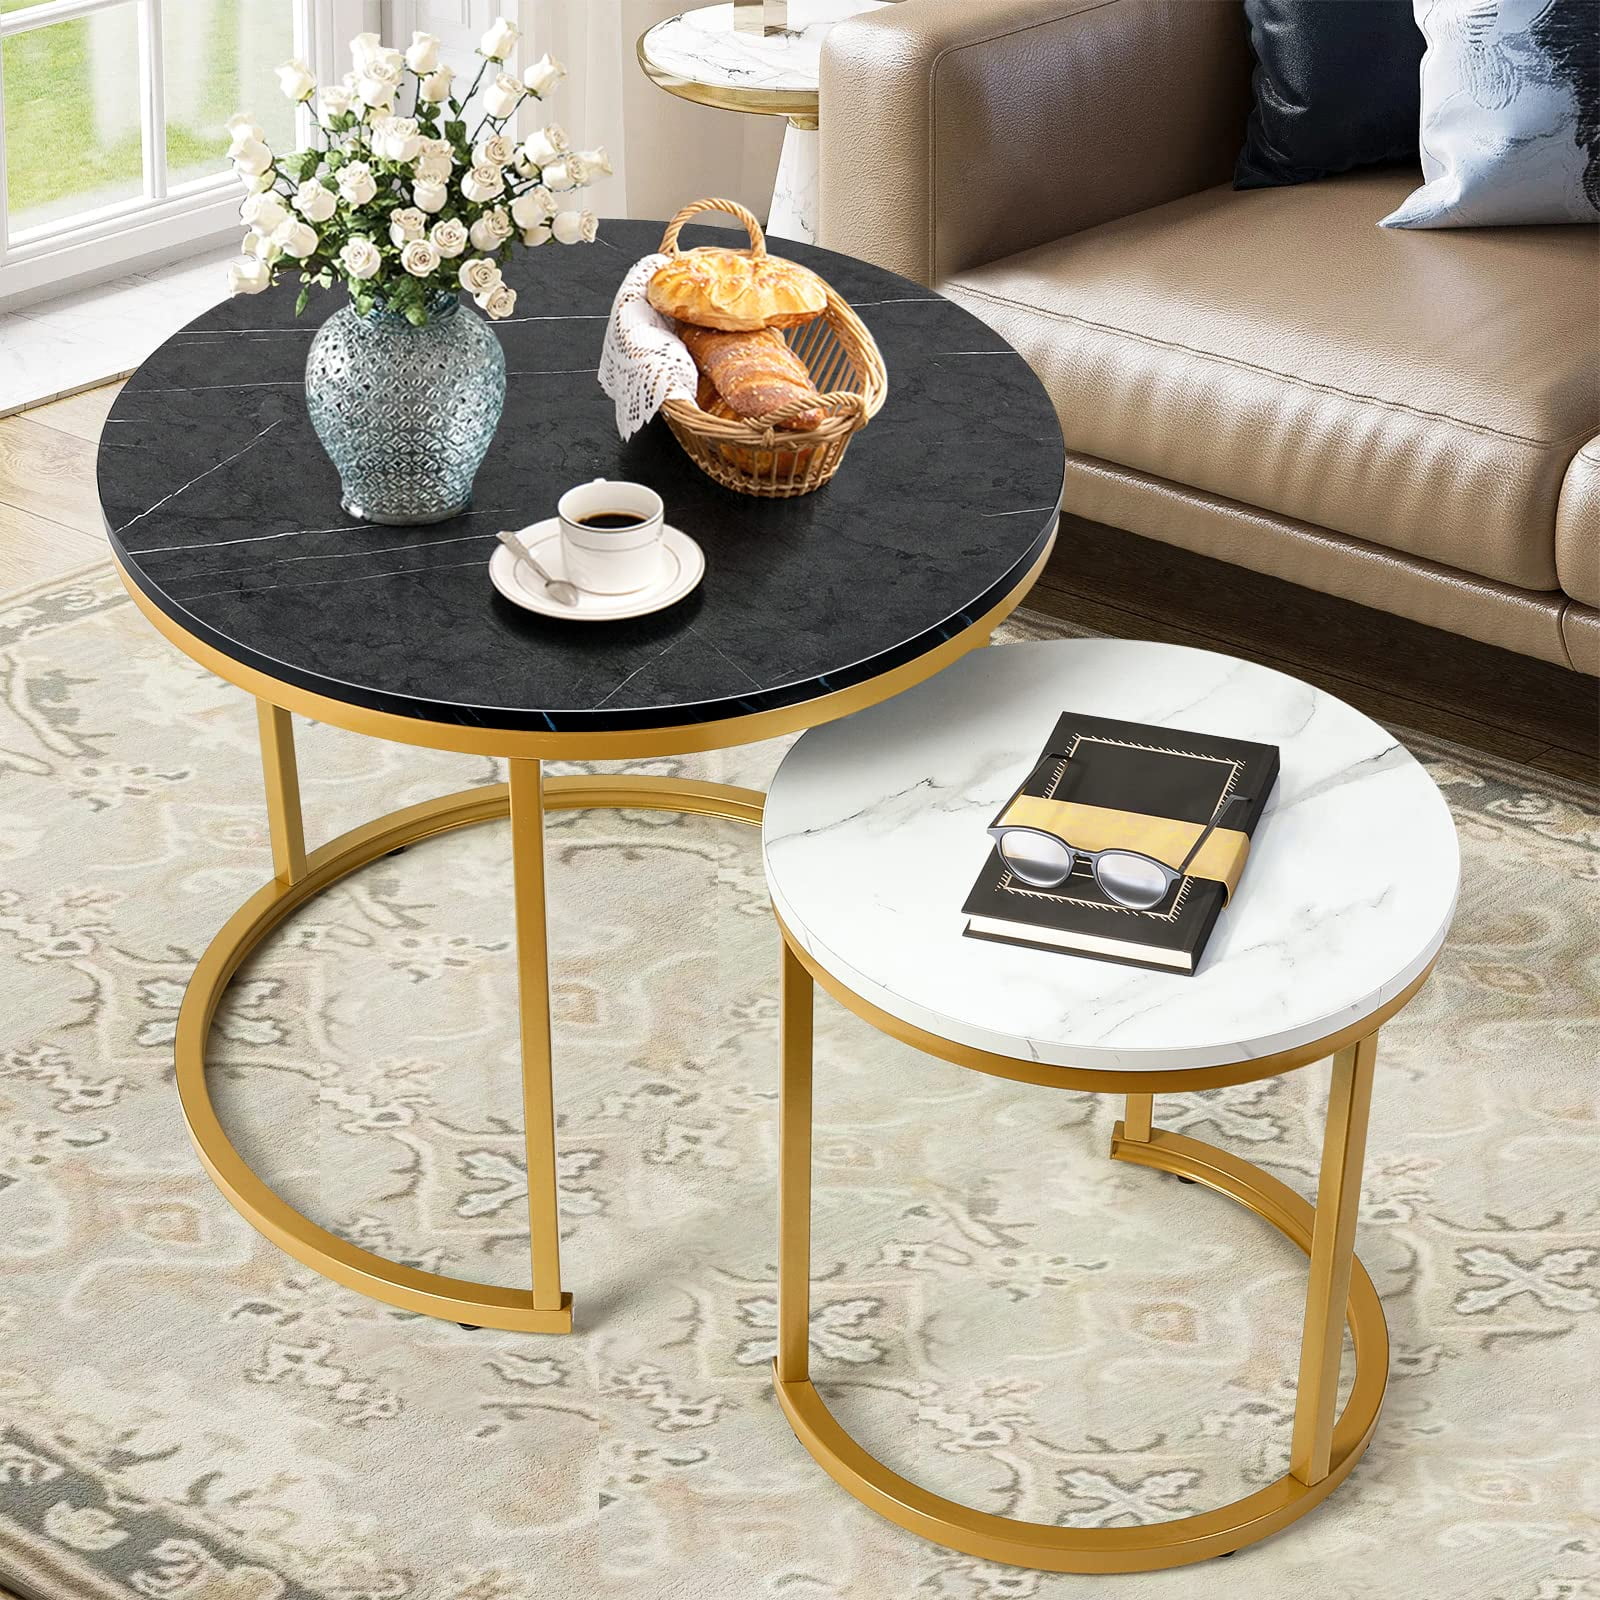 Lift Top Round Coffee Table with Storage Compartment 3 Stools Pop Up Stone Tabletop Rising Top Modern Coffee Table Set for Living Room Apartment, Size